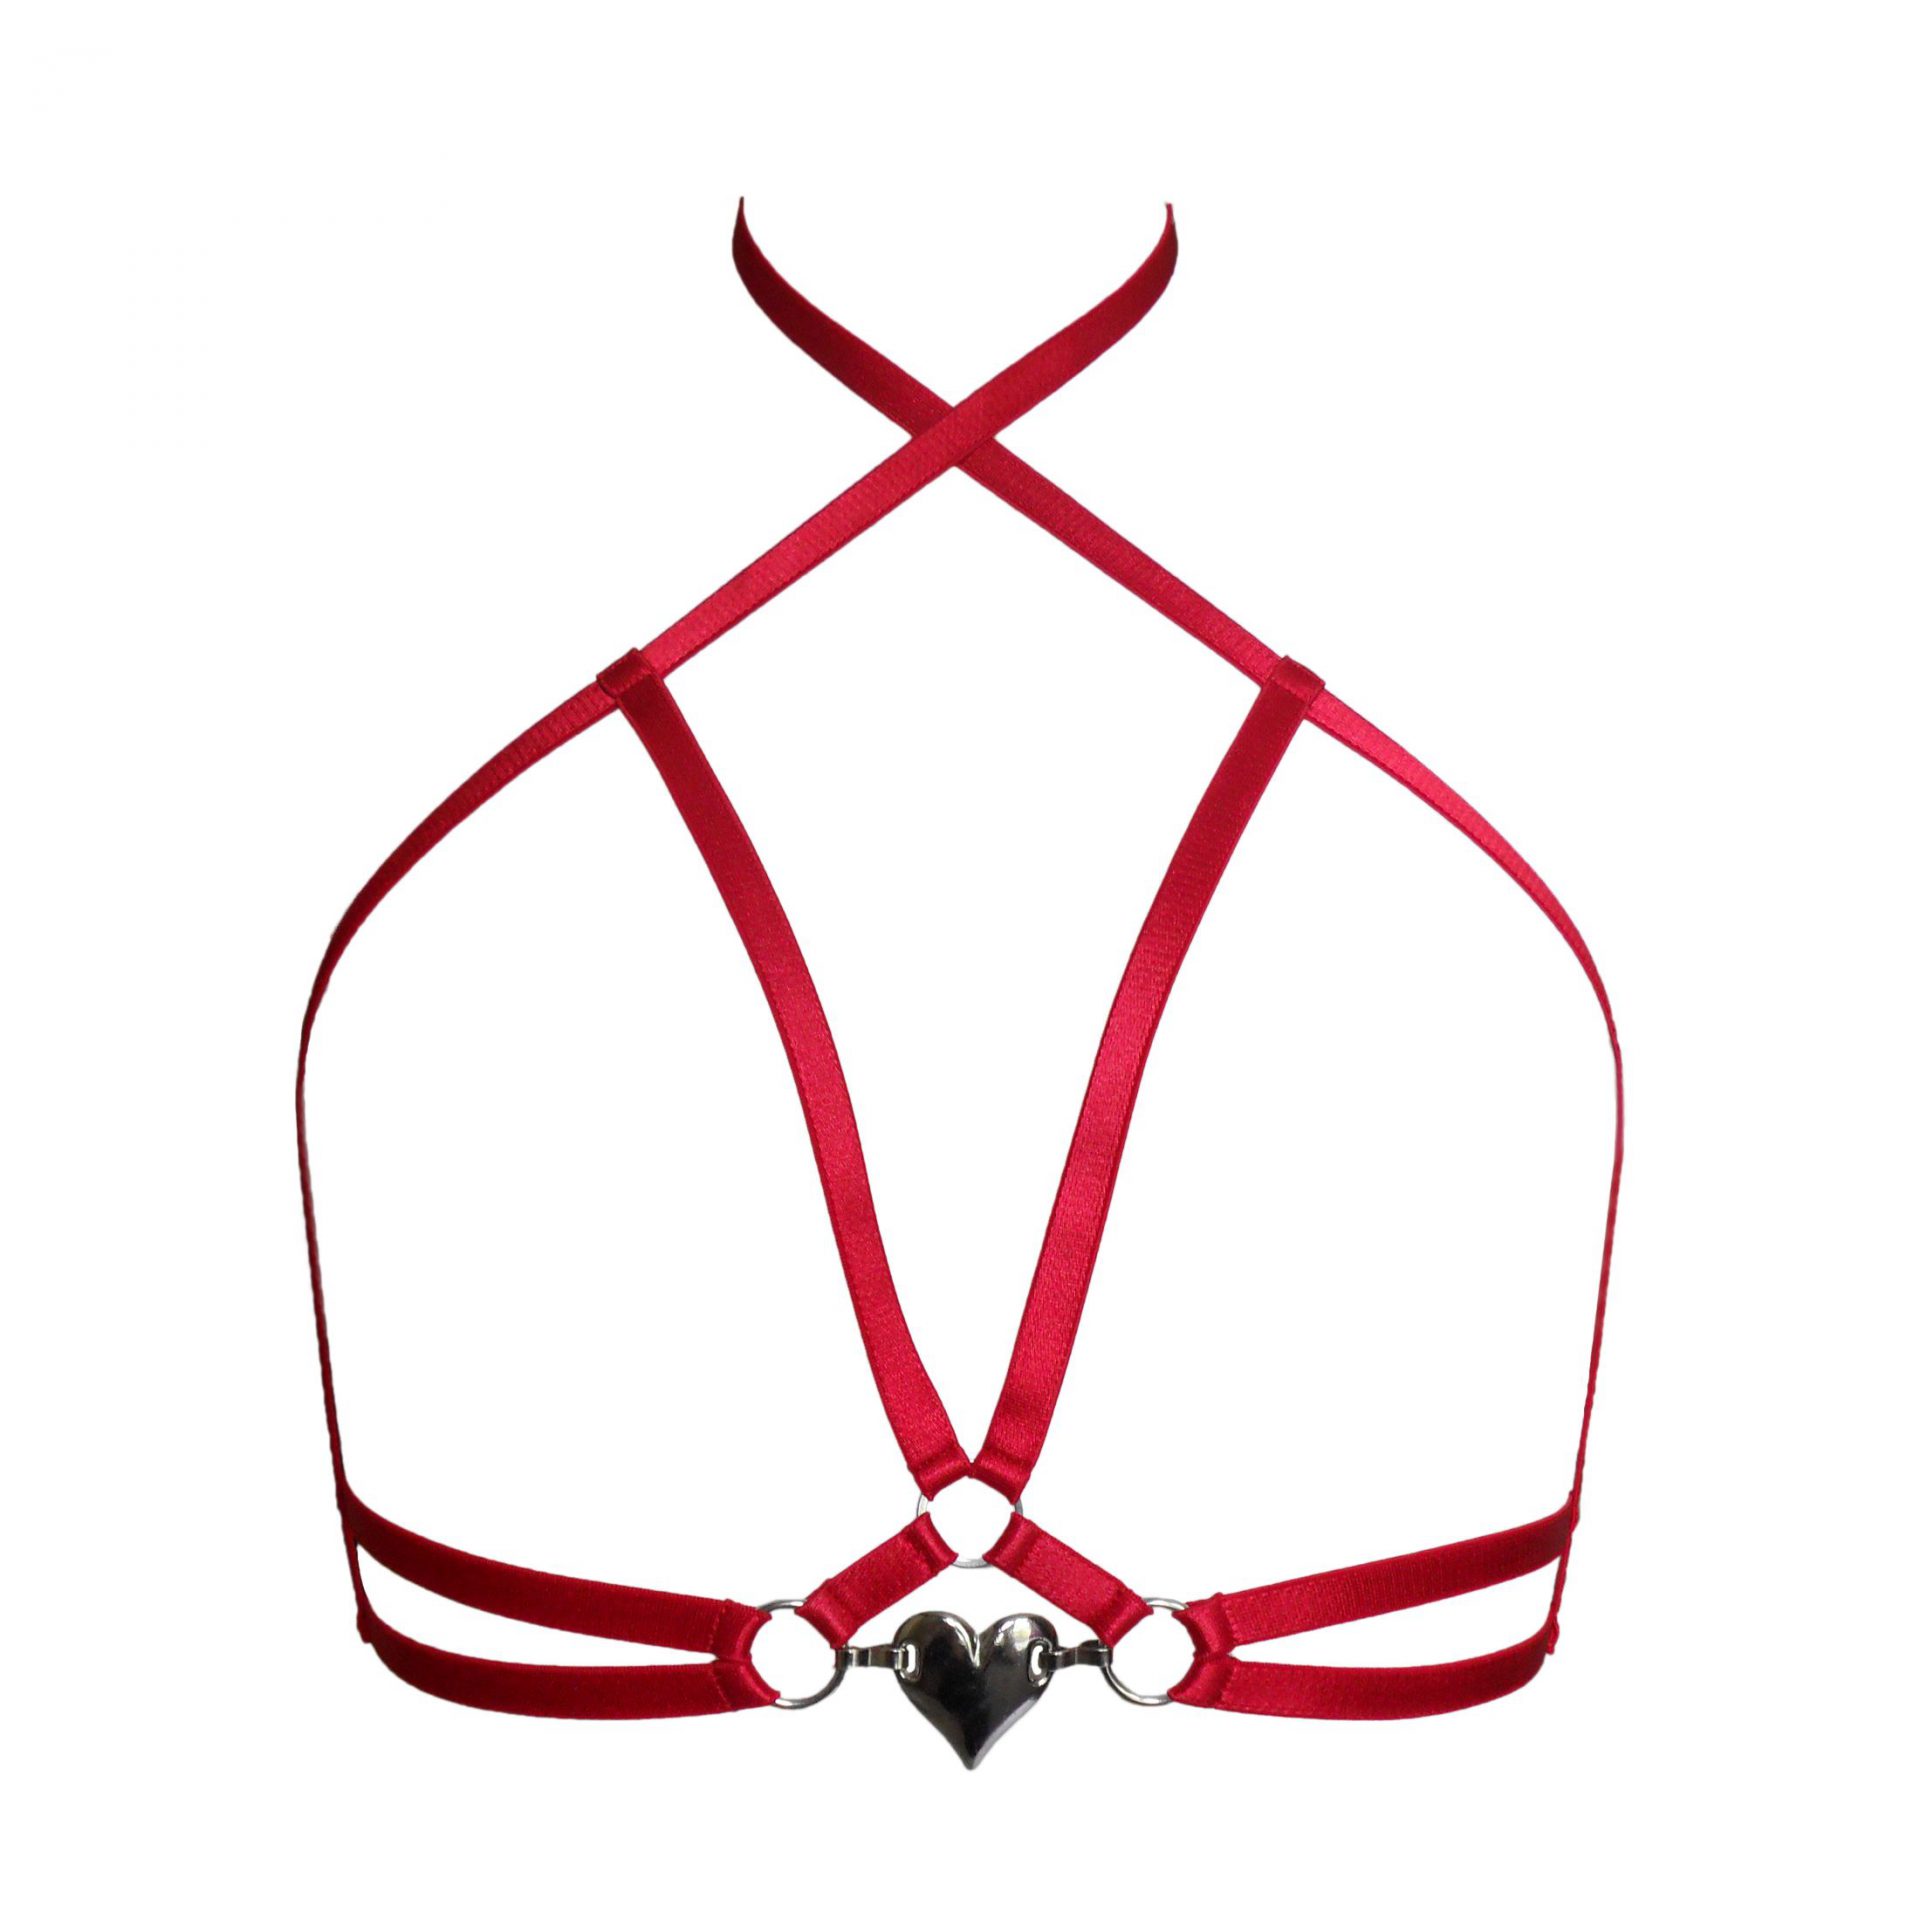 https://estylingerie.com/wp-content/uploads/2016/12/red-satin-elastic-harness-bra-with-silver-metal-heart-band-34-14158-p.jpg